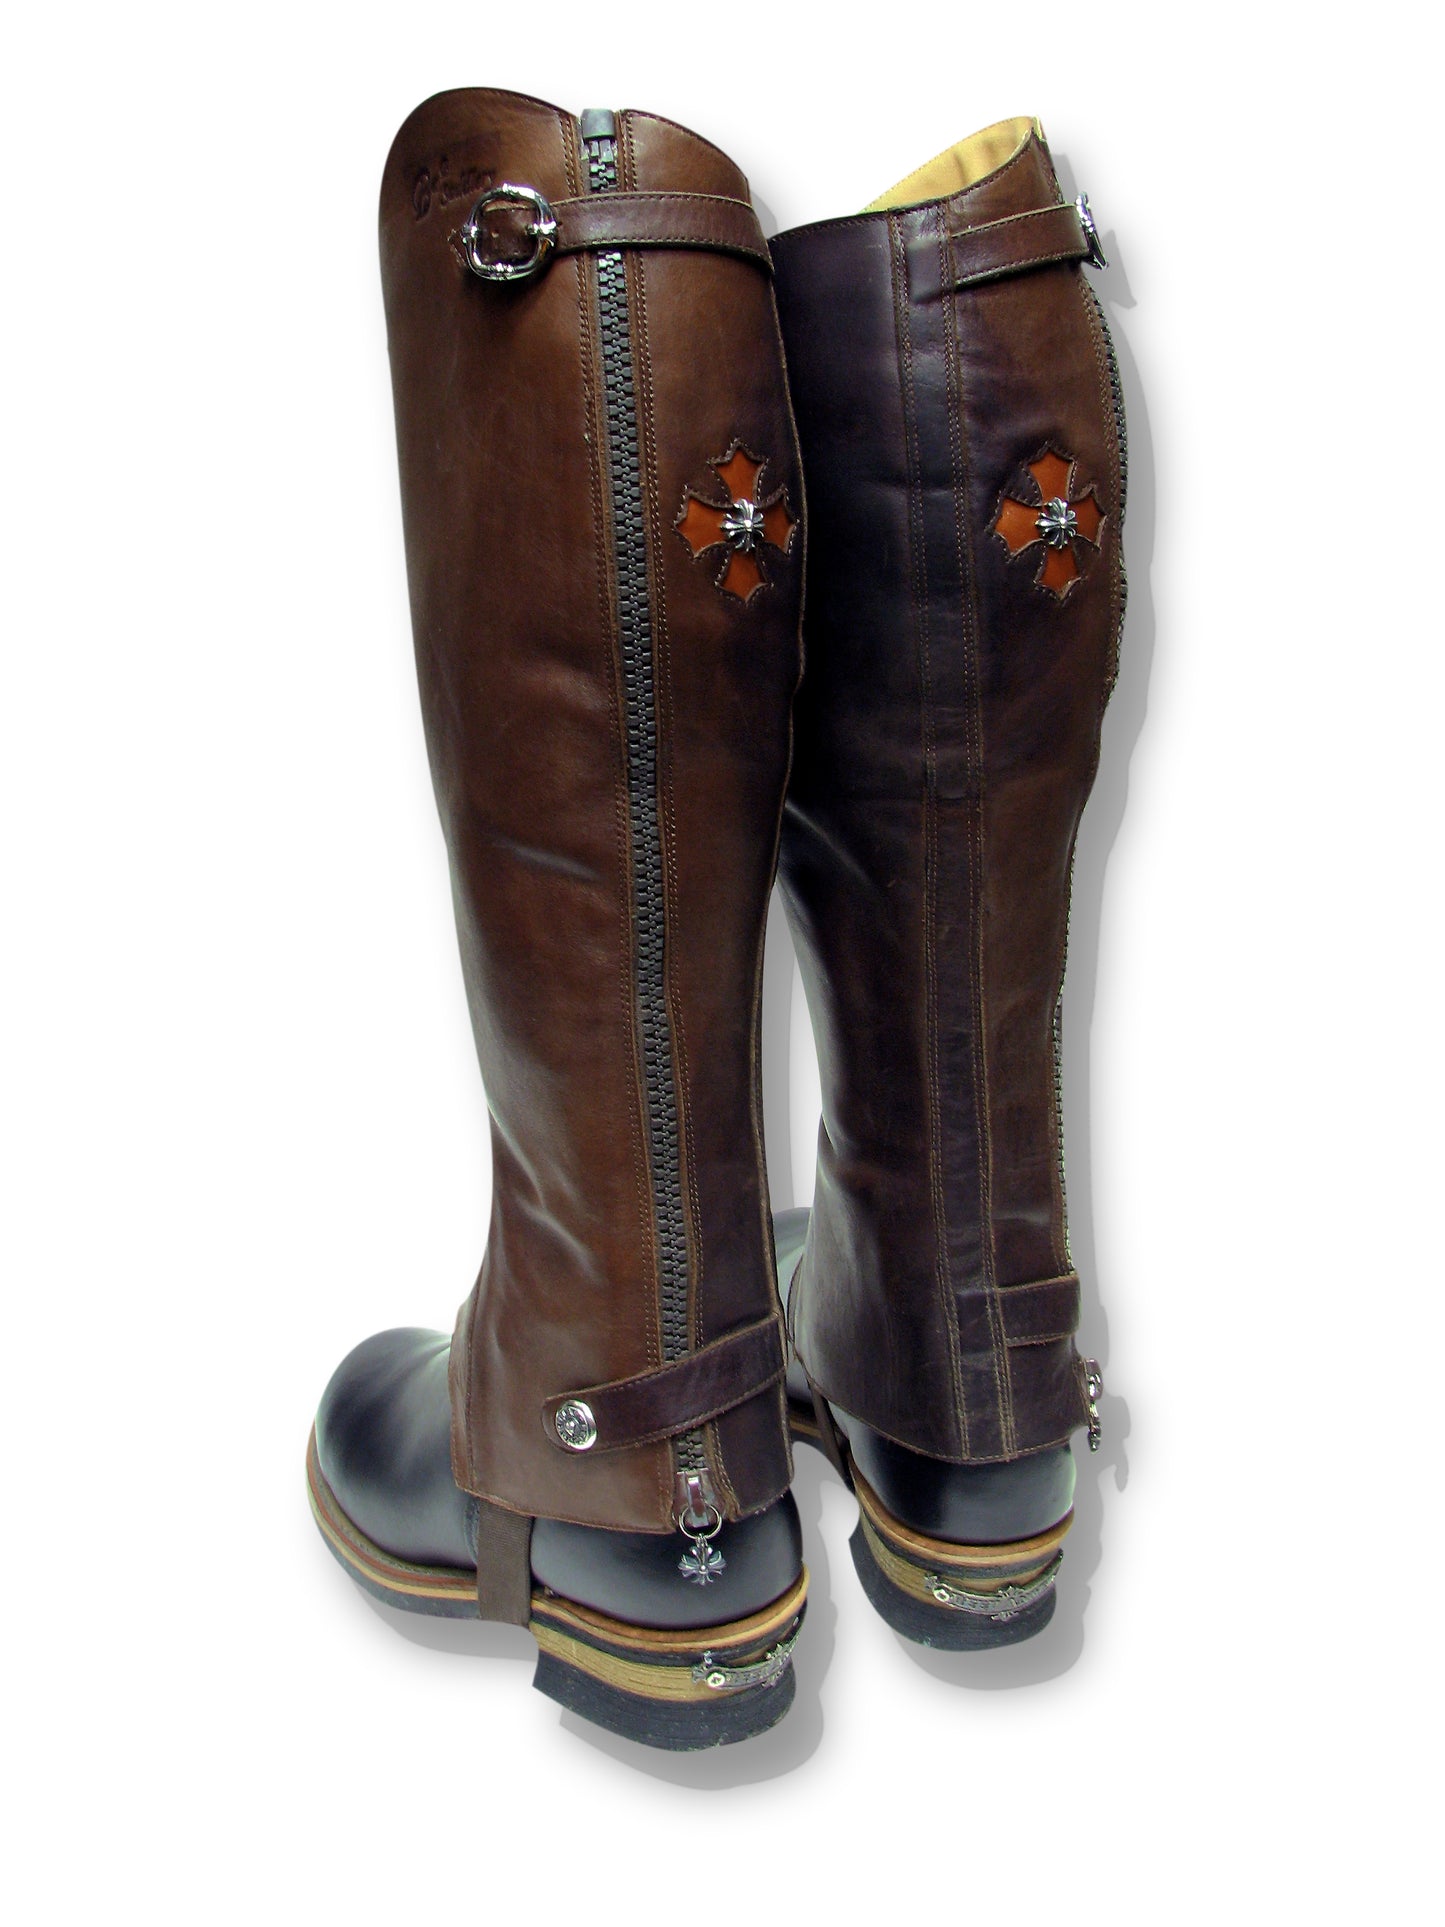 reborn project - riding boots